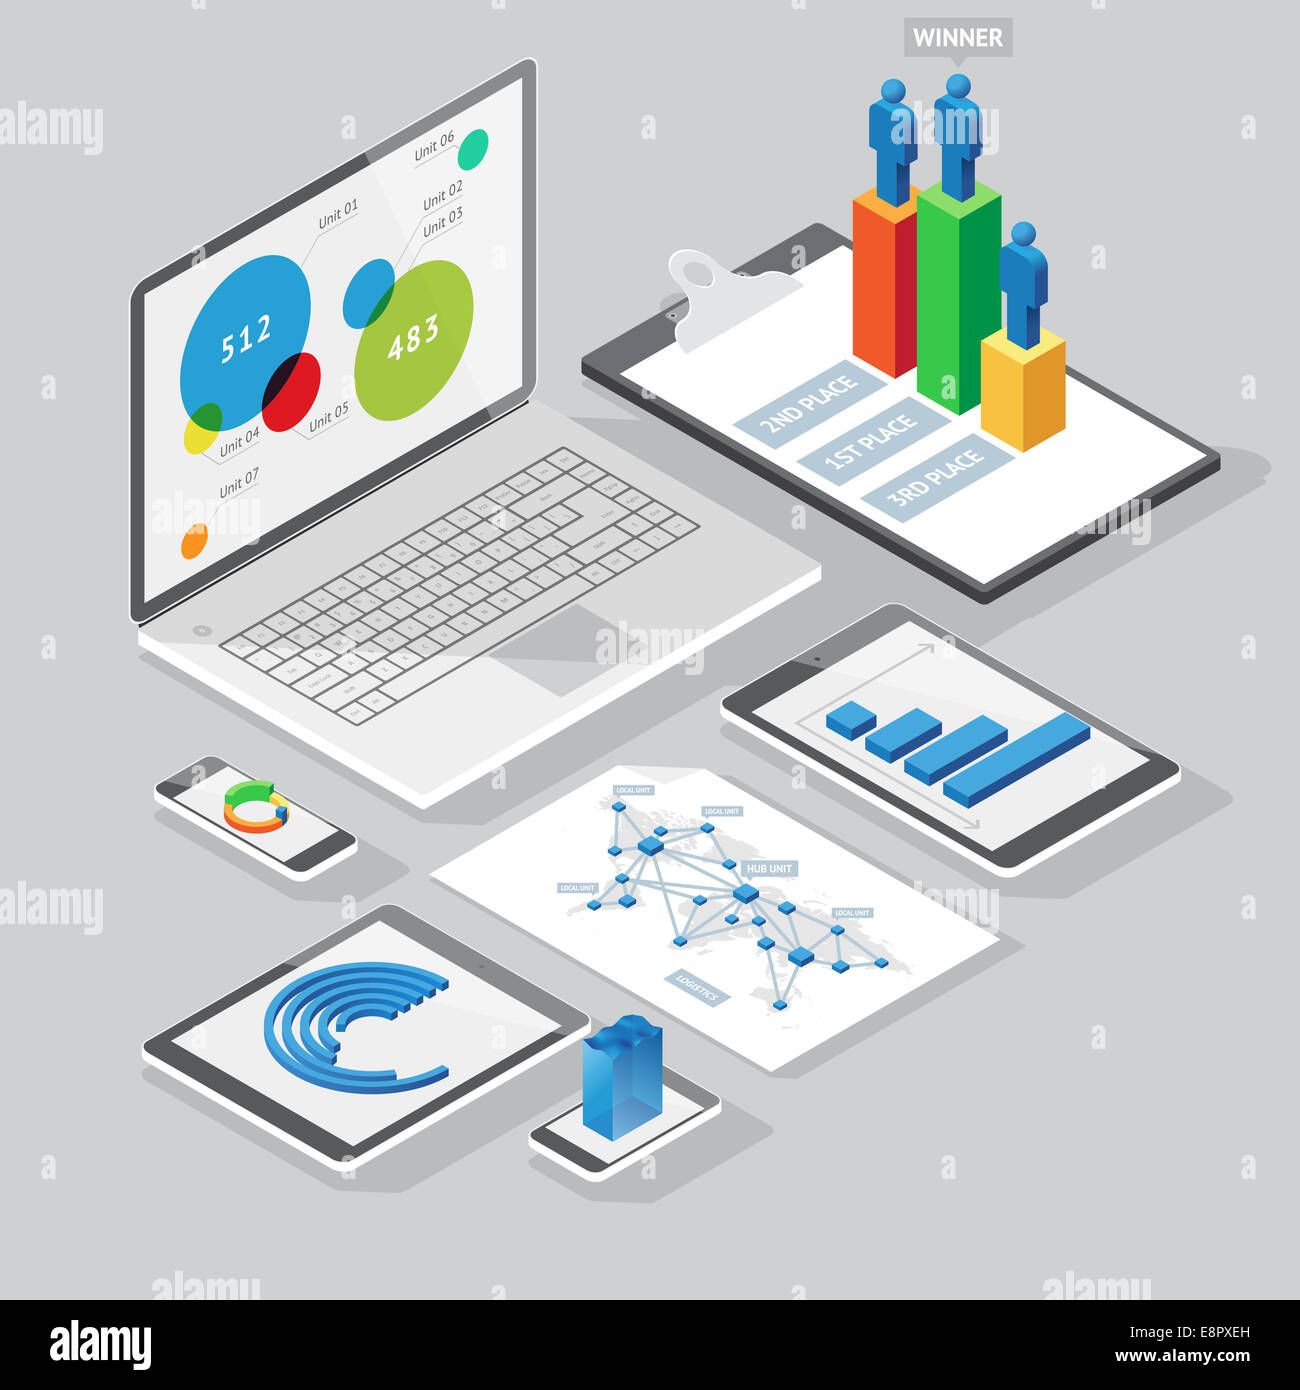 Set of infographics design elements on stationery and computer devices. Isometric style. Stock Photo